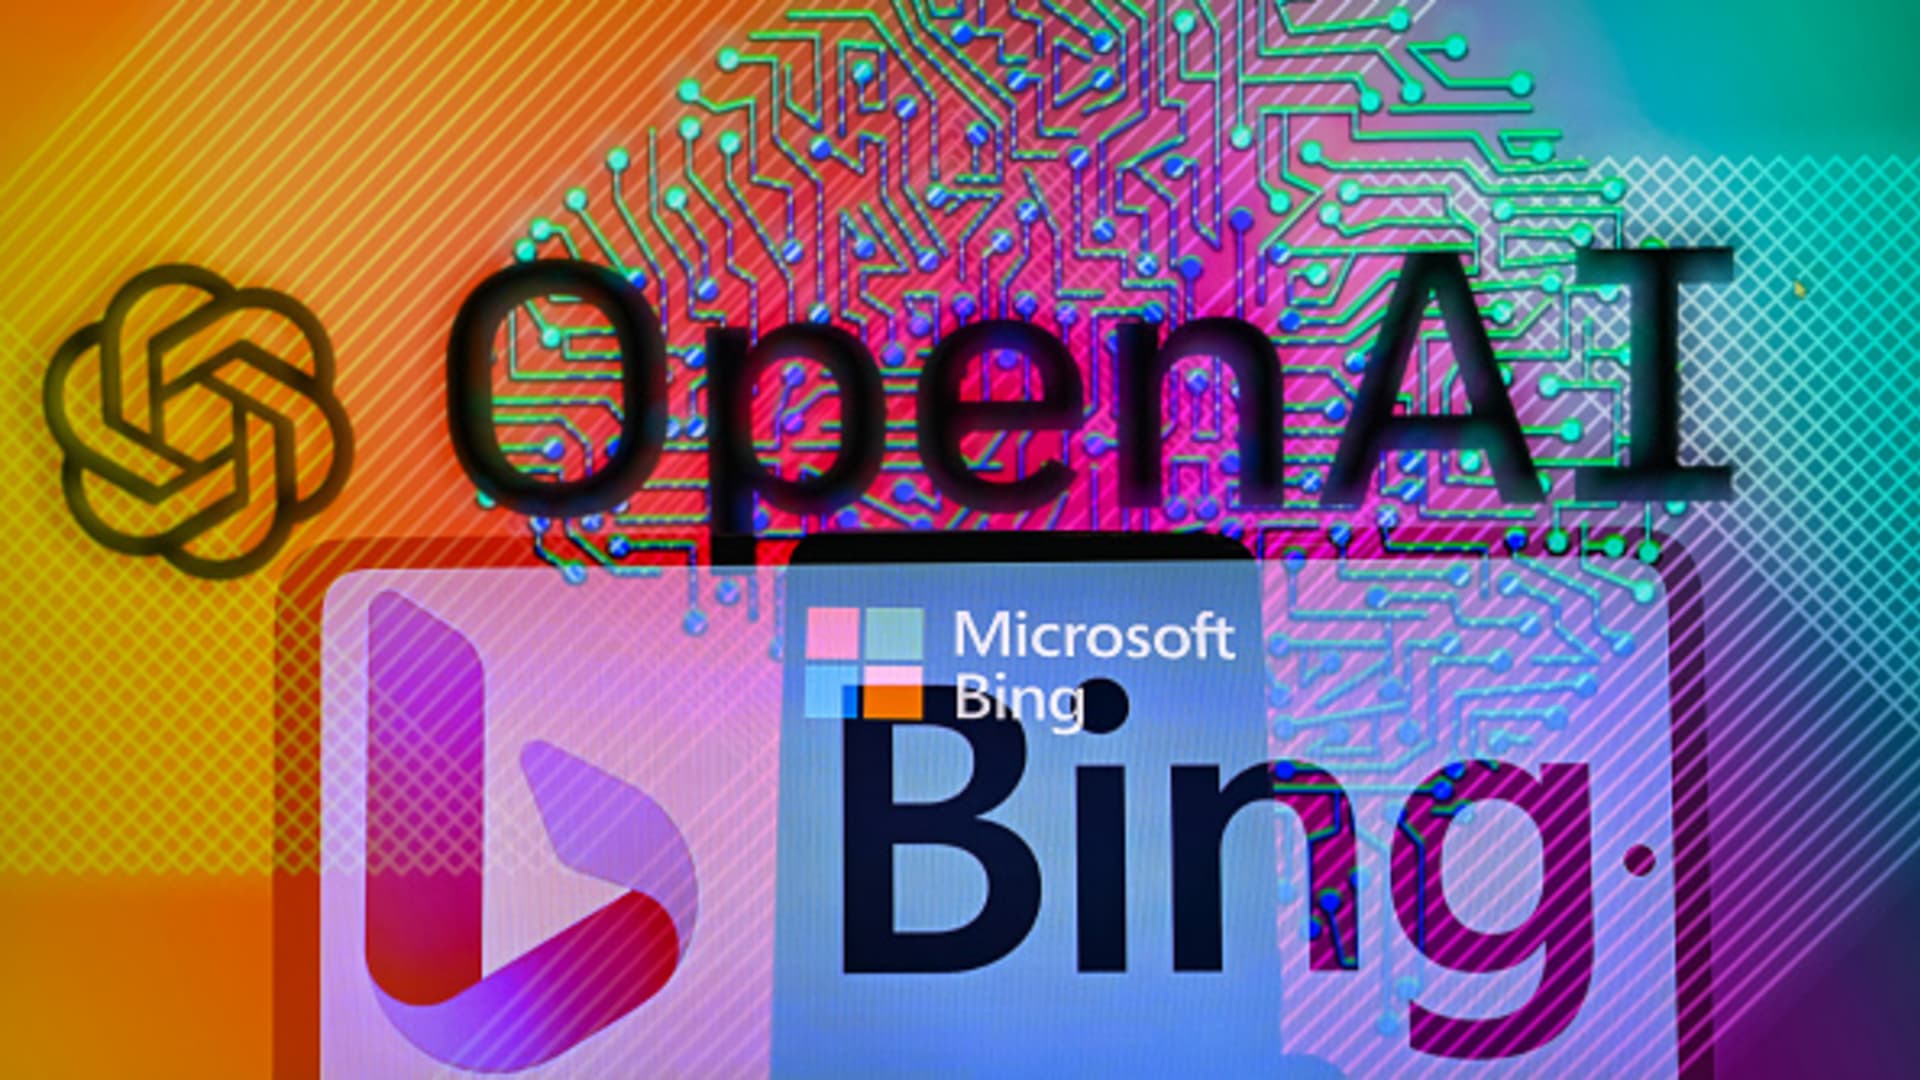 Microsoft Bing now uses OpenAI's DALL-E A.I. to turn text into images